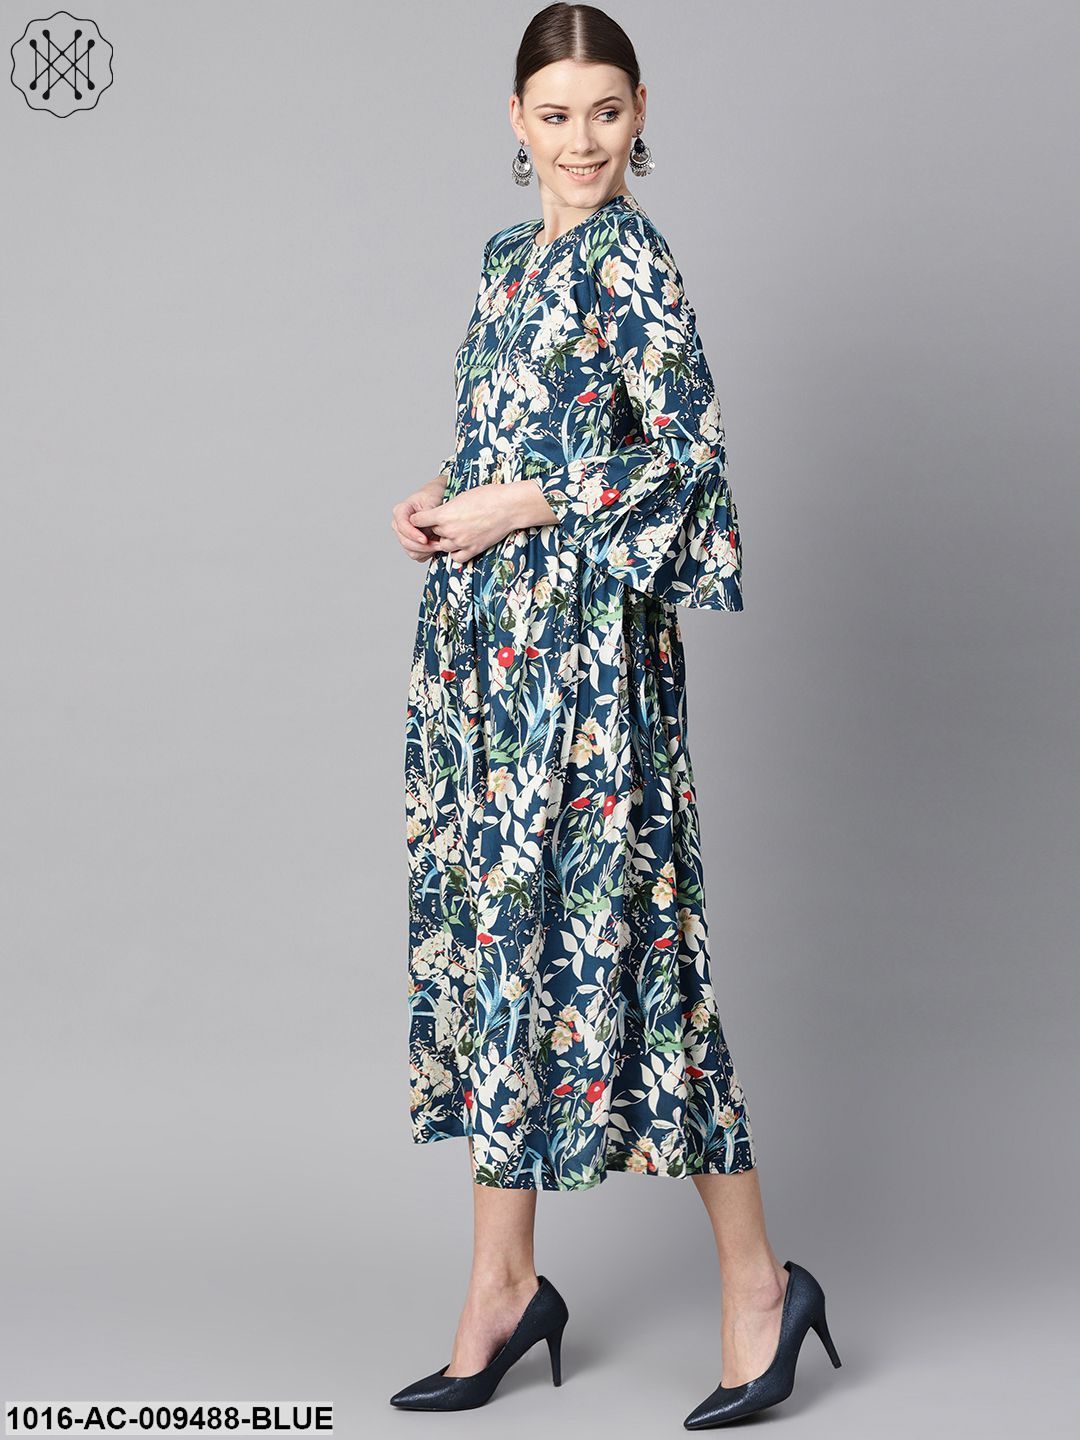 Blue Multicolored Quirky Floral Printed High Neck Back Hook Closure 3/4Th Flared Sleeves Gathered Dress.